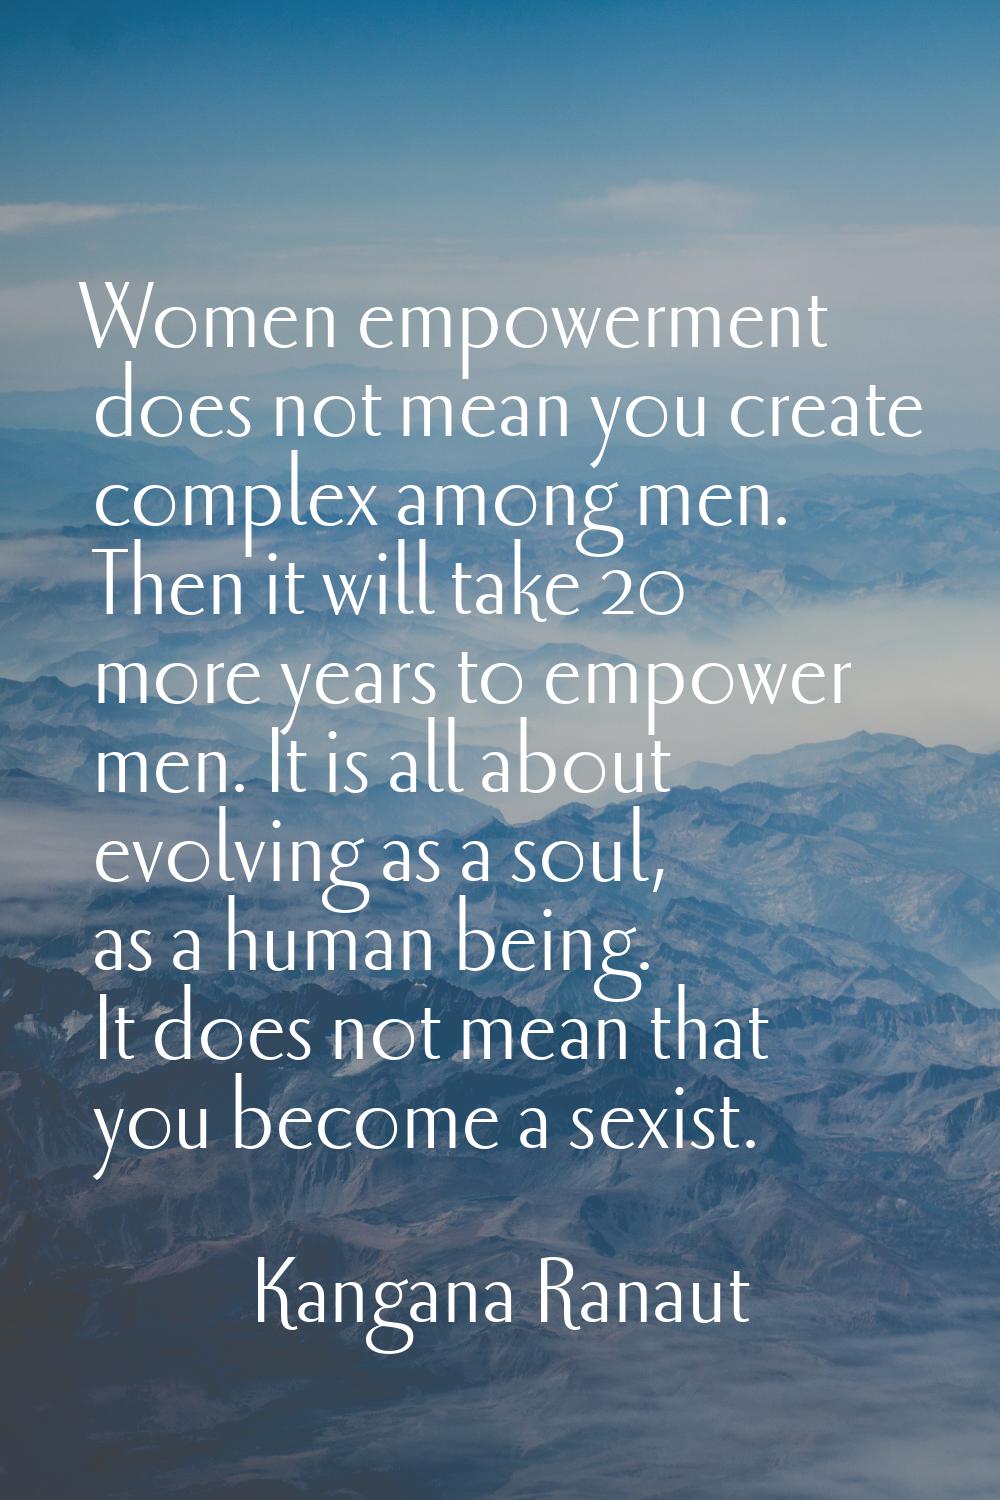 Women empowerment does not mean you create complex among men. Then it will take 20 more years to em